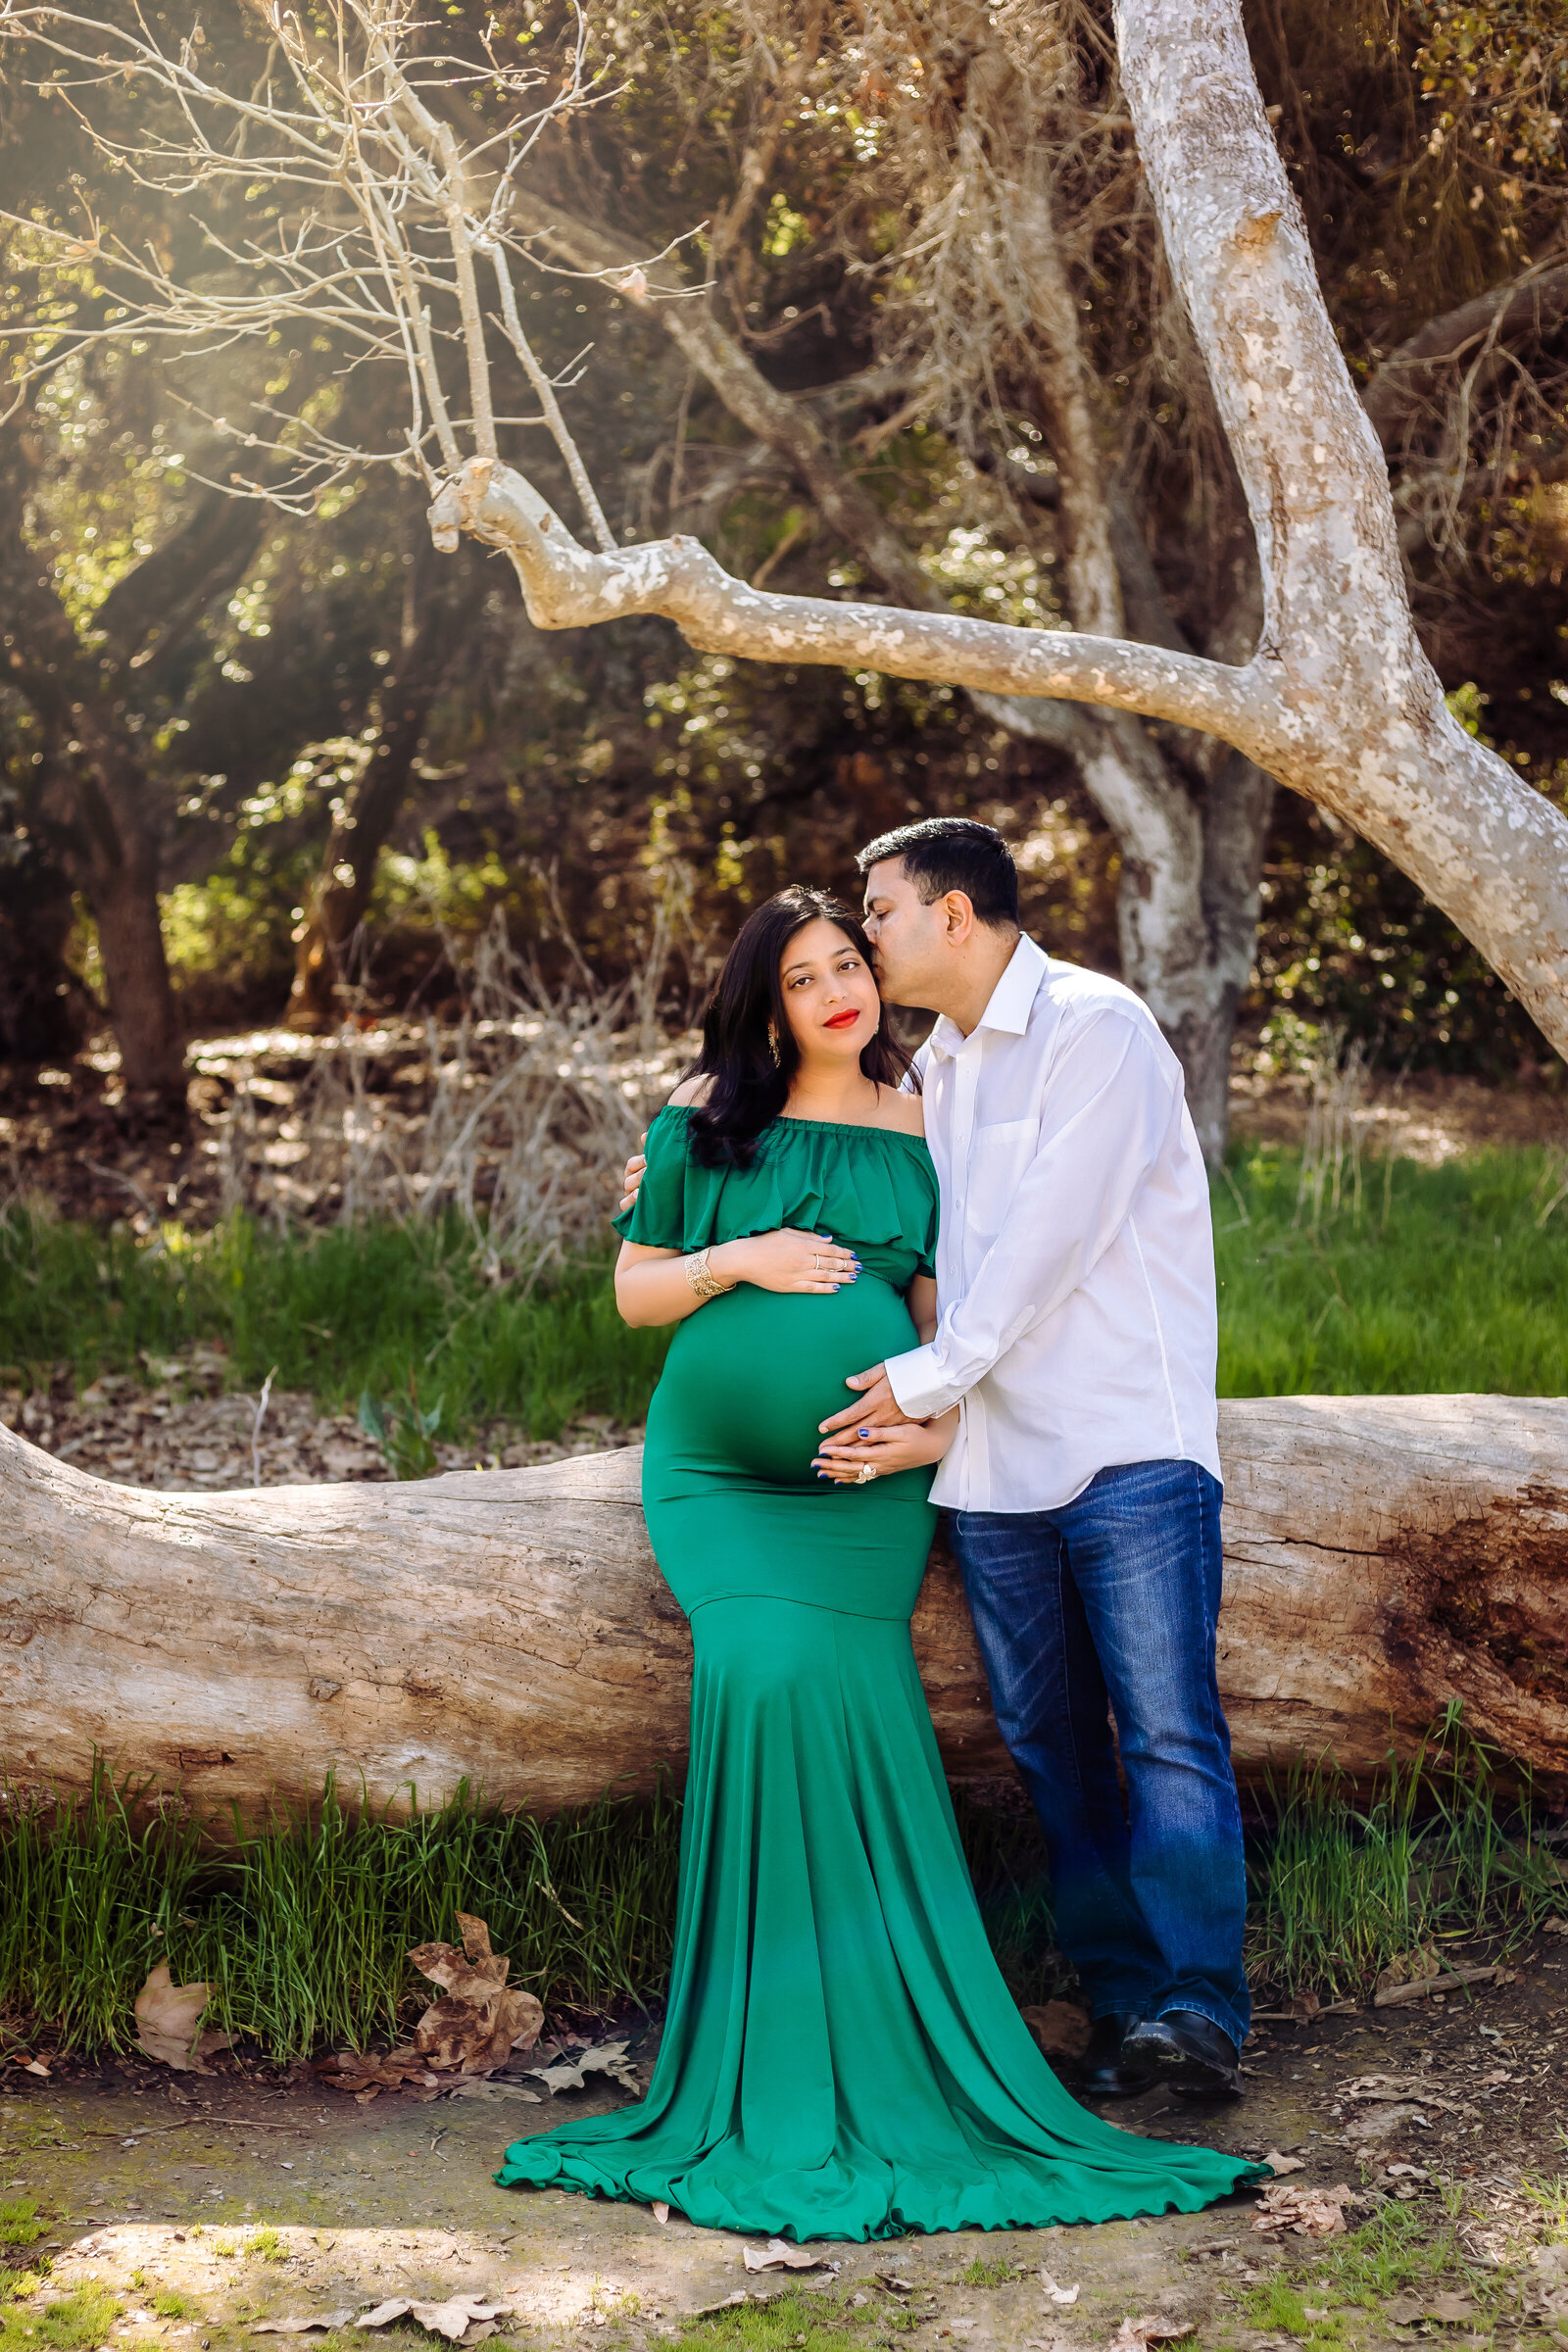 Maternity Photographer, a couoke hold each other close outside beneath trees, she is pregnant